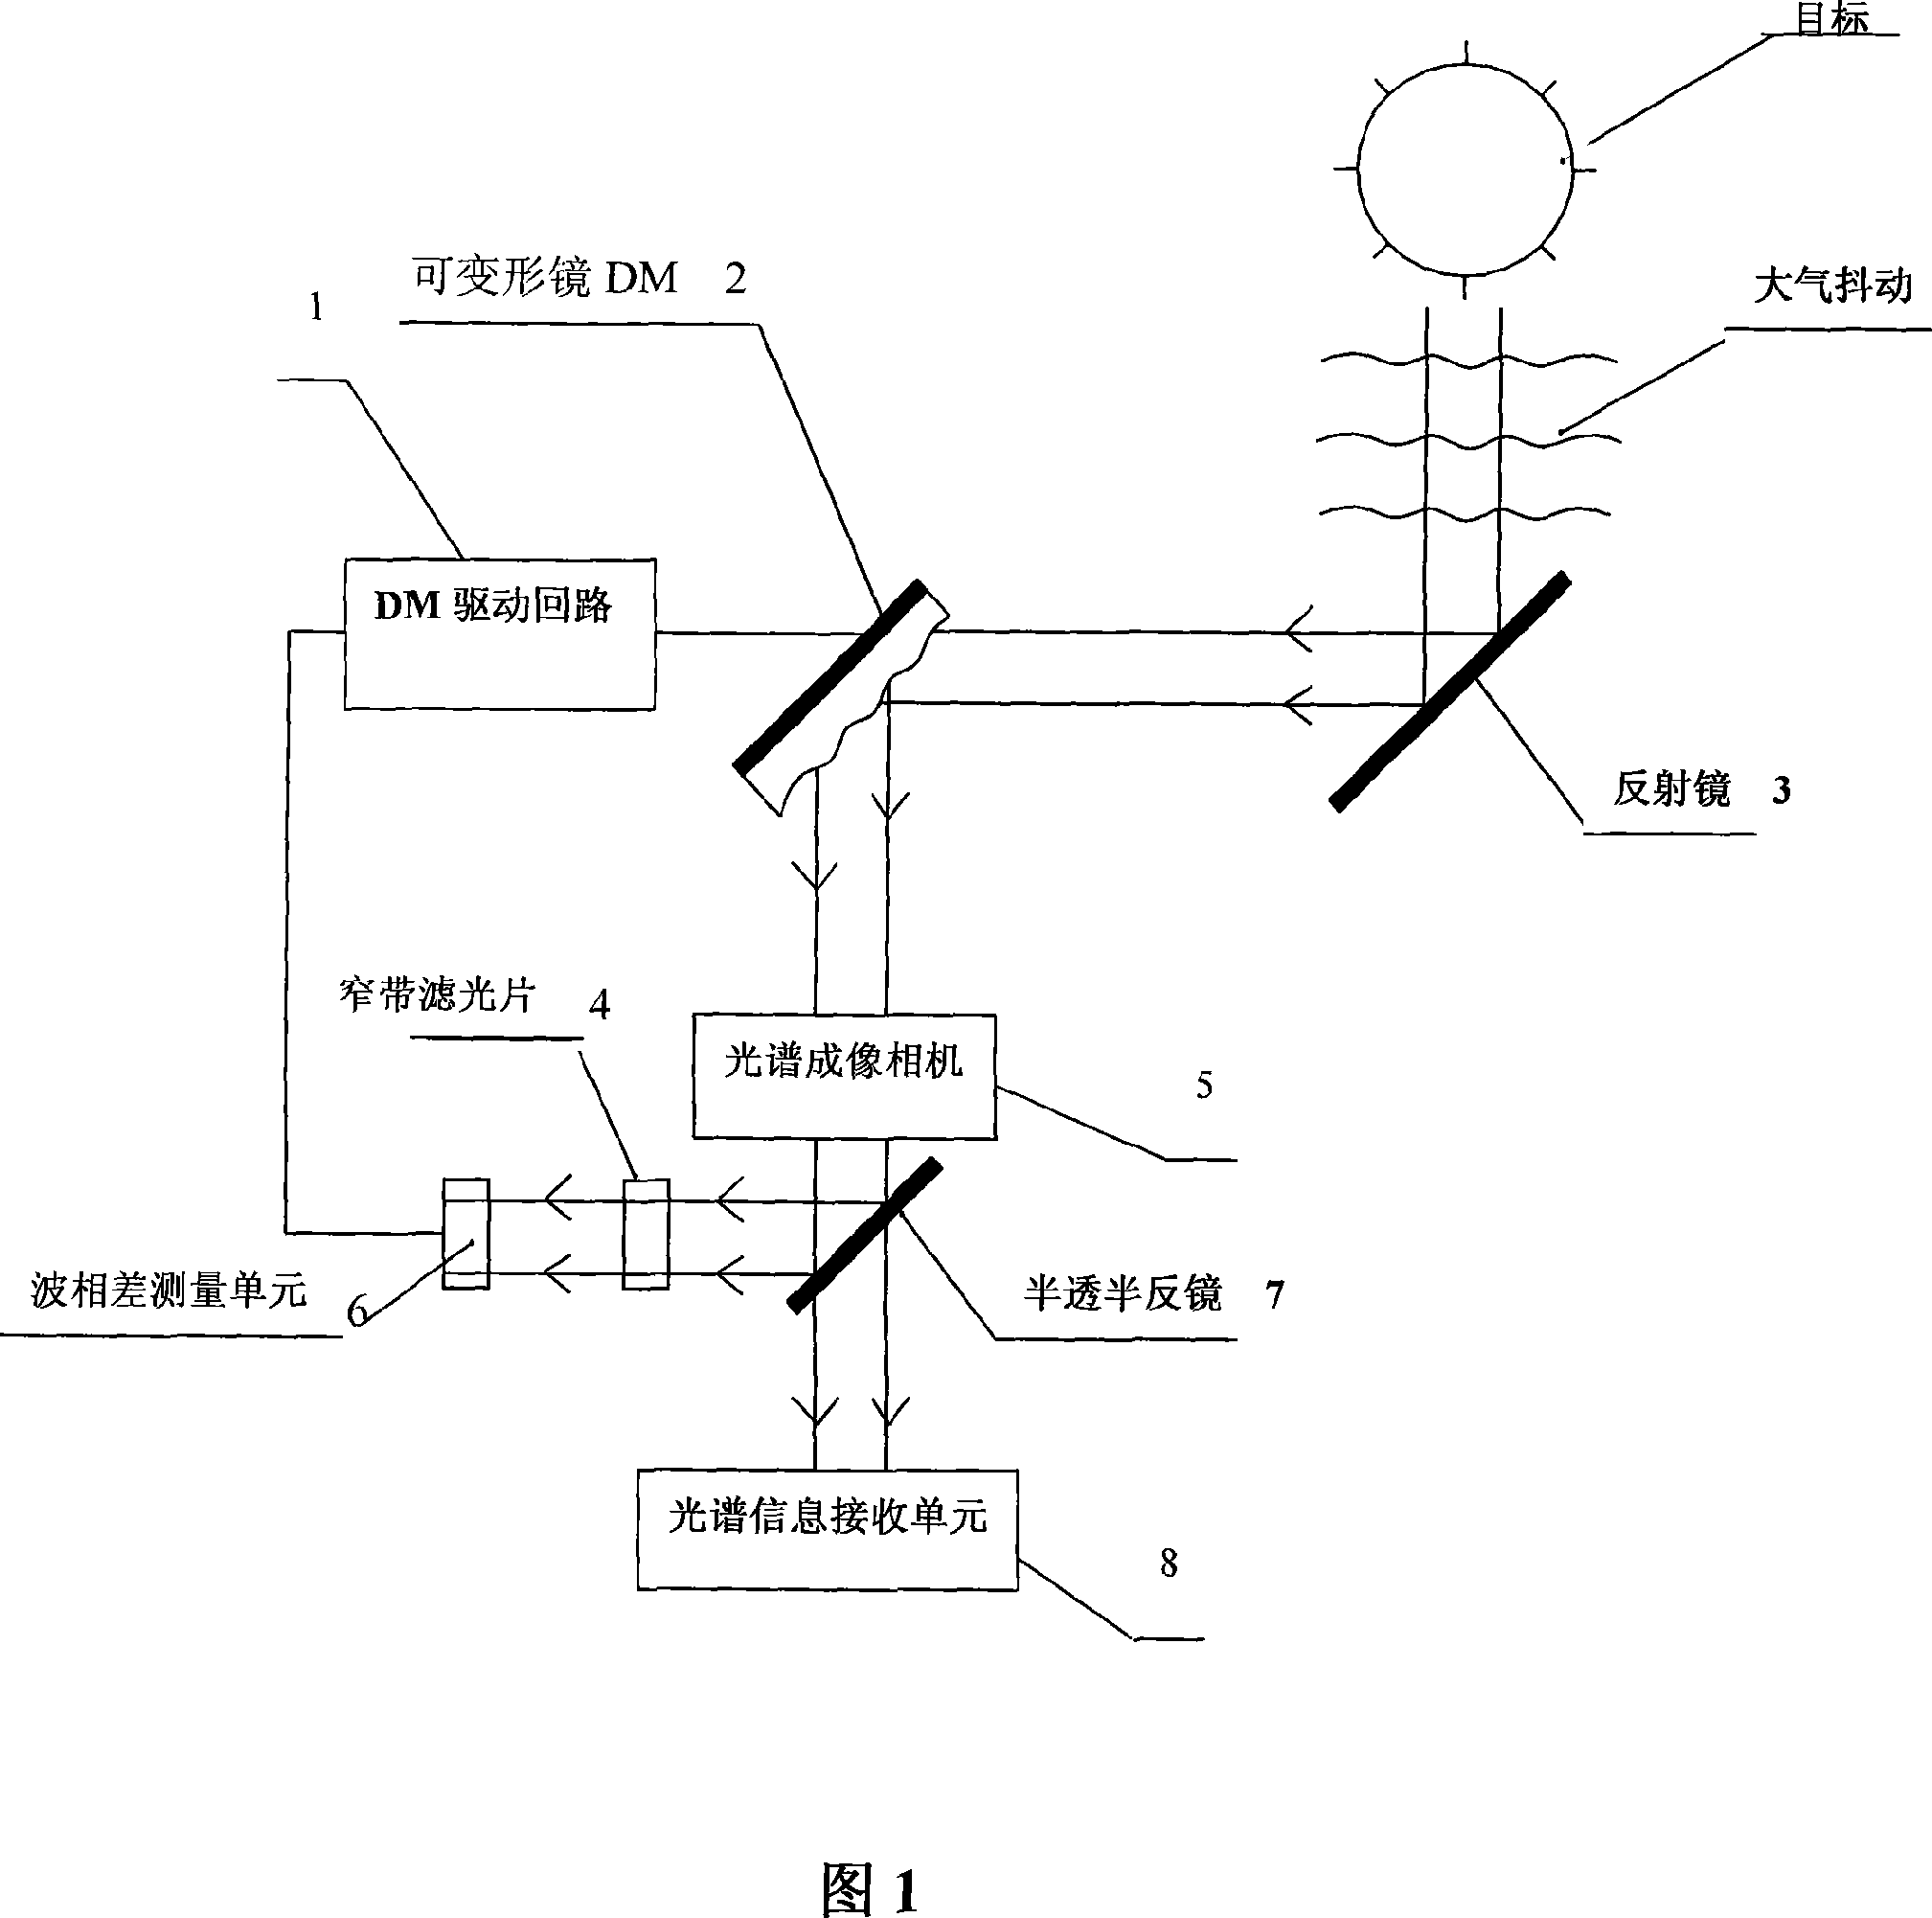 Image-forming spectral measurement device